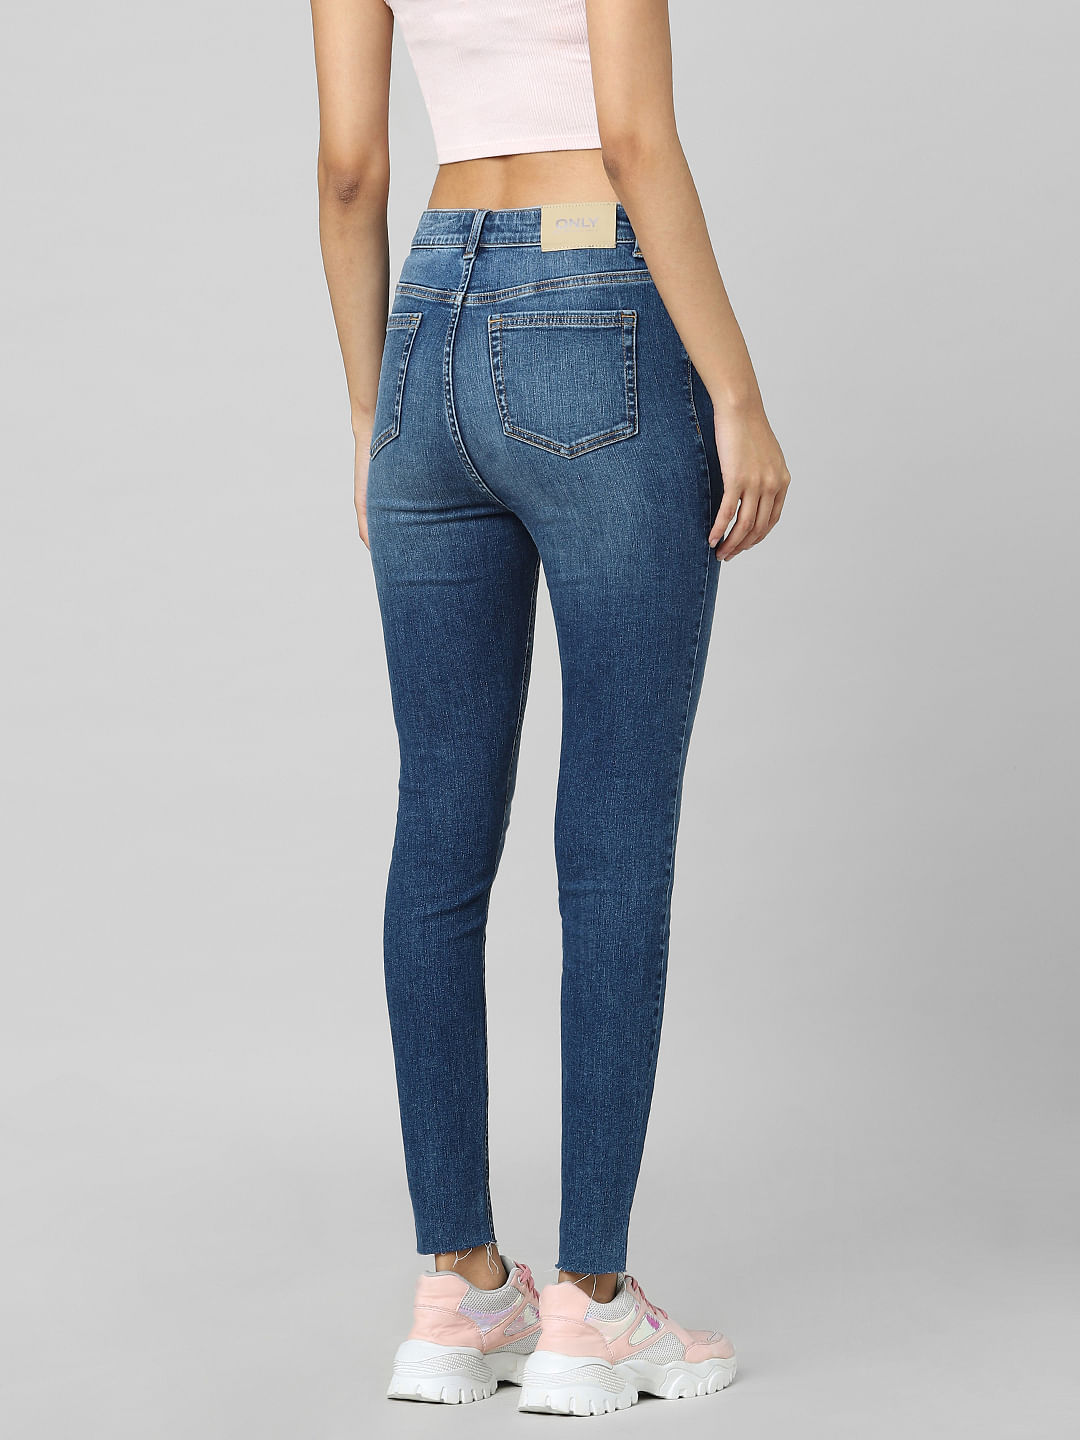 7 For All Mankind The Ankle Super Skinny Dark Distressed - Jeans